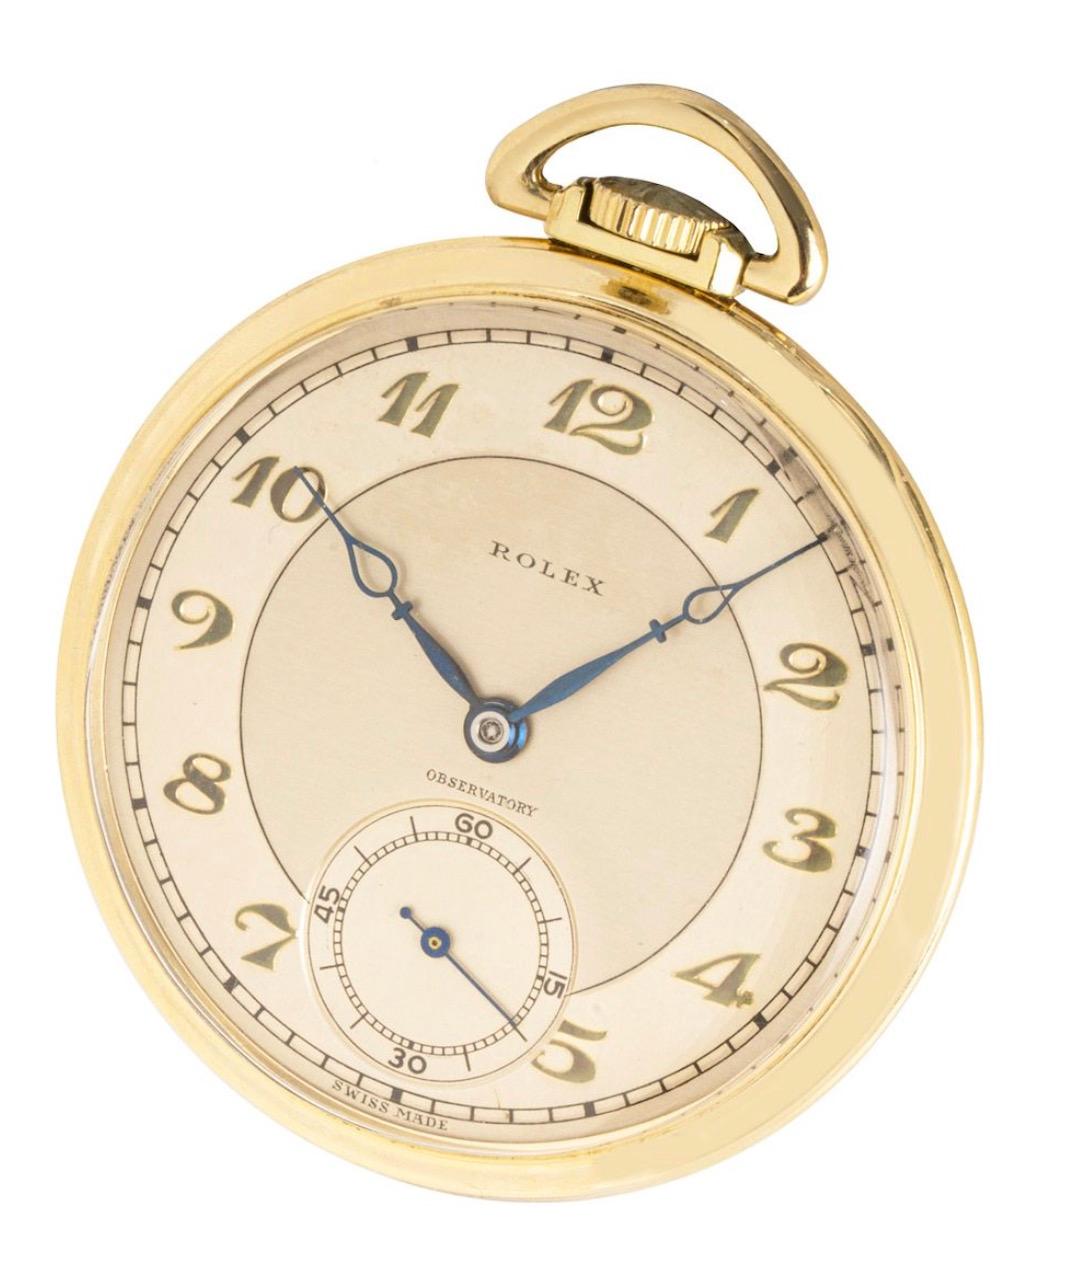 Rolex 43mm A 9ct Yellow Gold Keyless Lever Open Face Observatory Quality Pocket Watch C1930s with it's original Rolex box stating that Rolex received the Highest Honours ever awarded by London Paris and Genève Observatories.

Dial: The signed Rolex